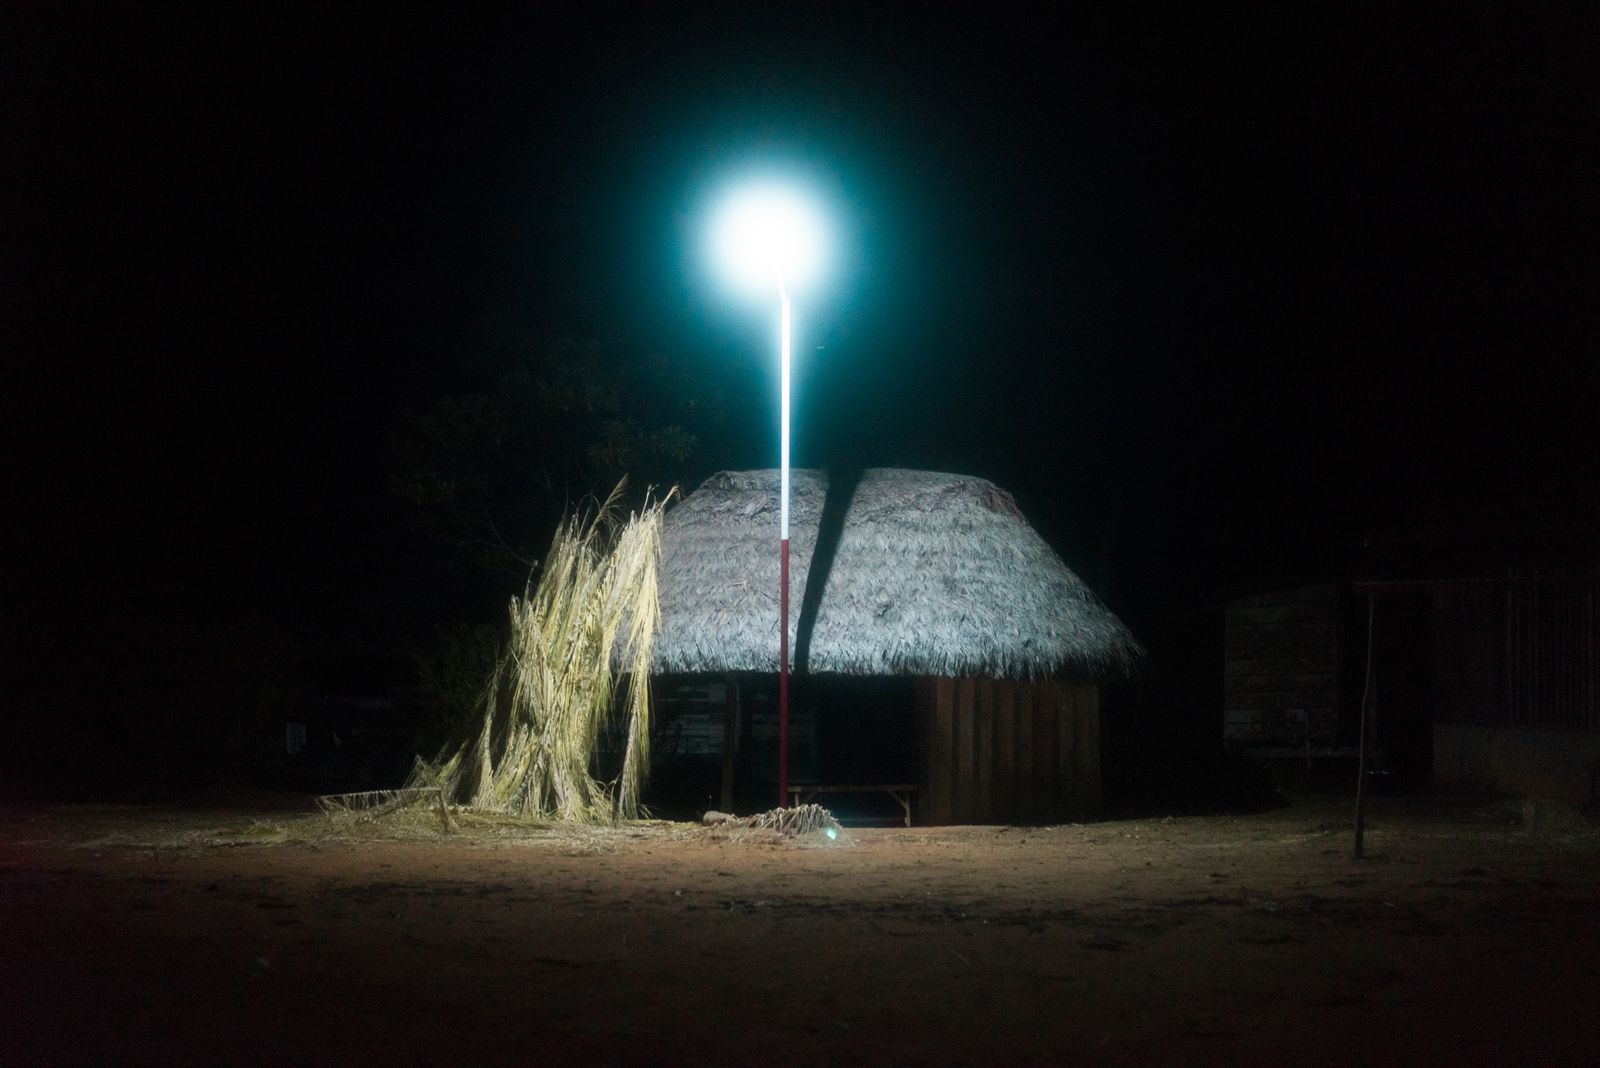 © Misha Vallejo - A hut is lit by solar powered lamps in Sarayaku’s central plaza.